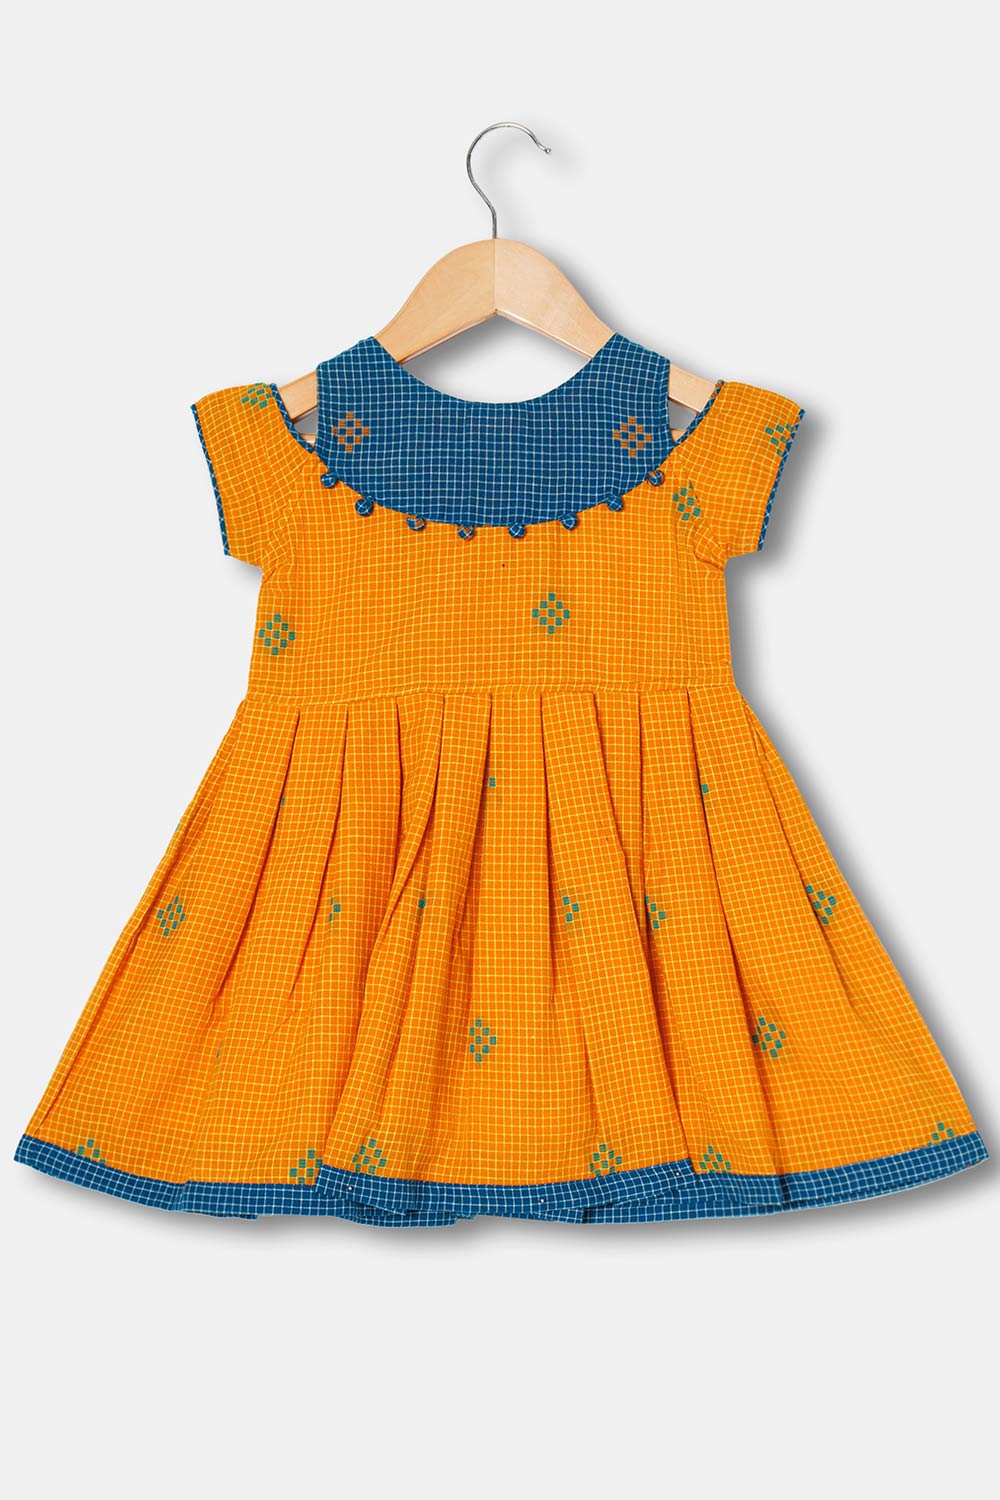 Chittythalli Girls Ethnic Wear Frock Handloom Cotton Relaxed Fit  - Yellow  - FR23